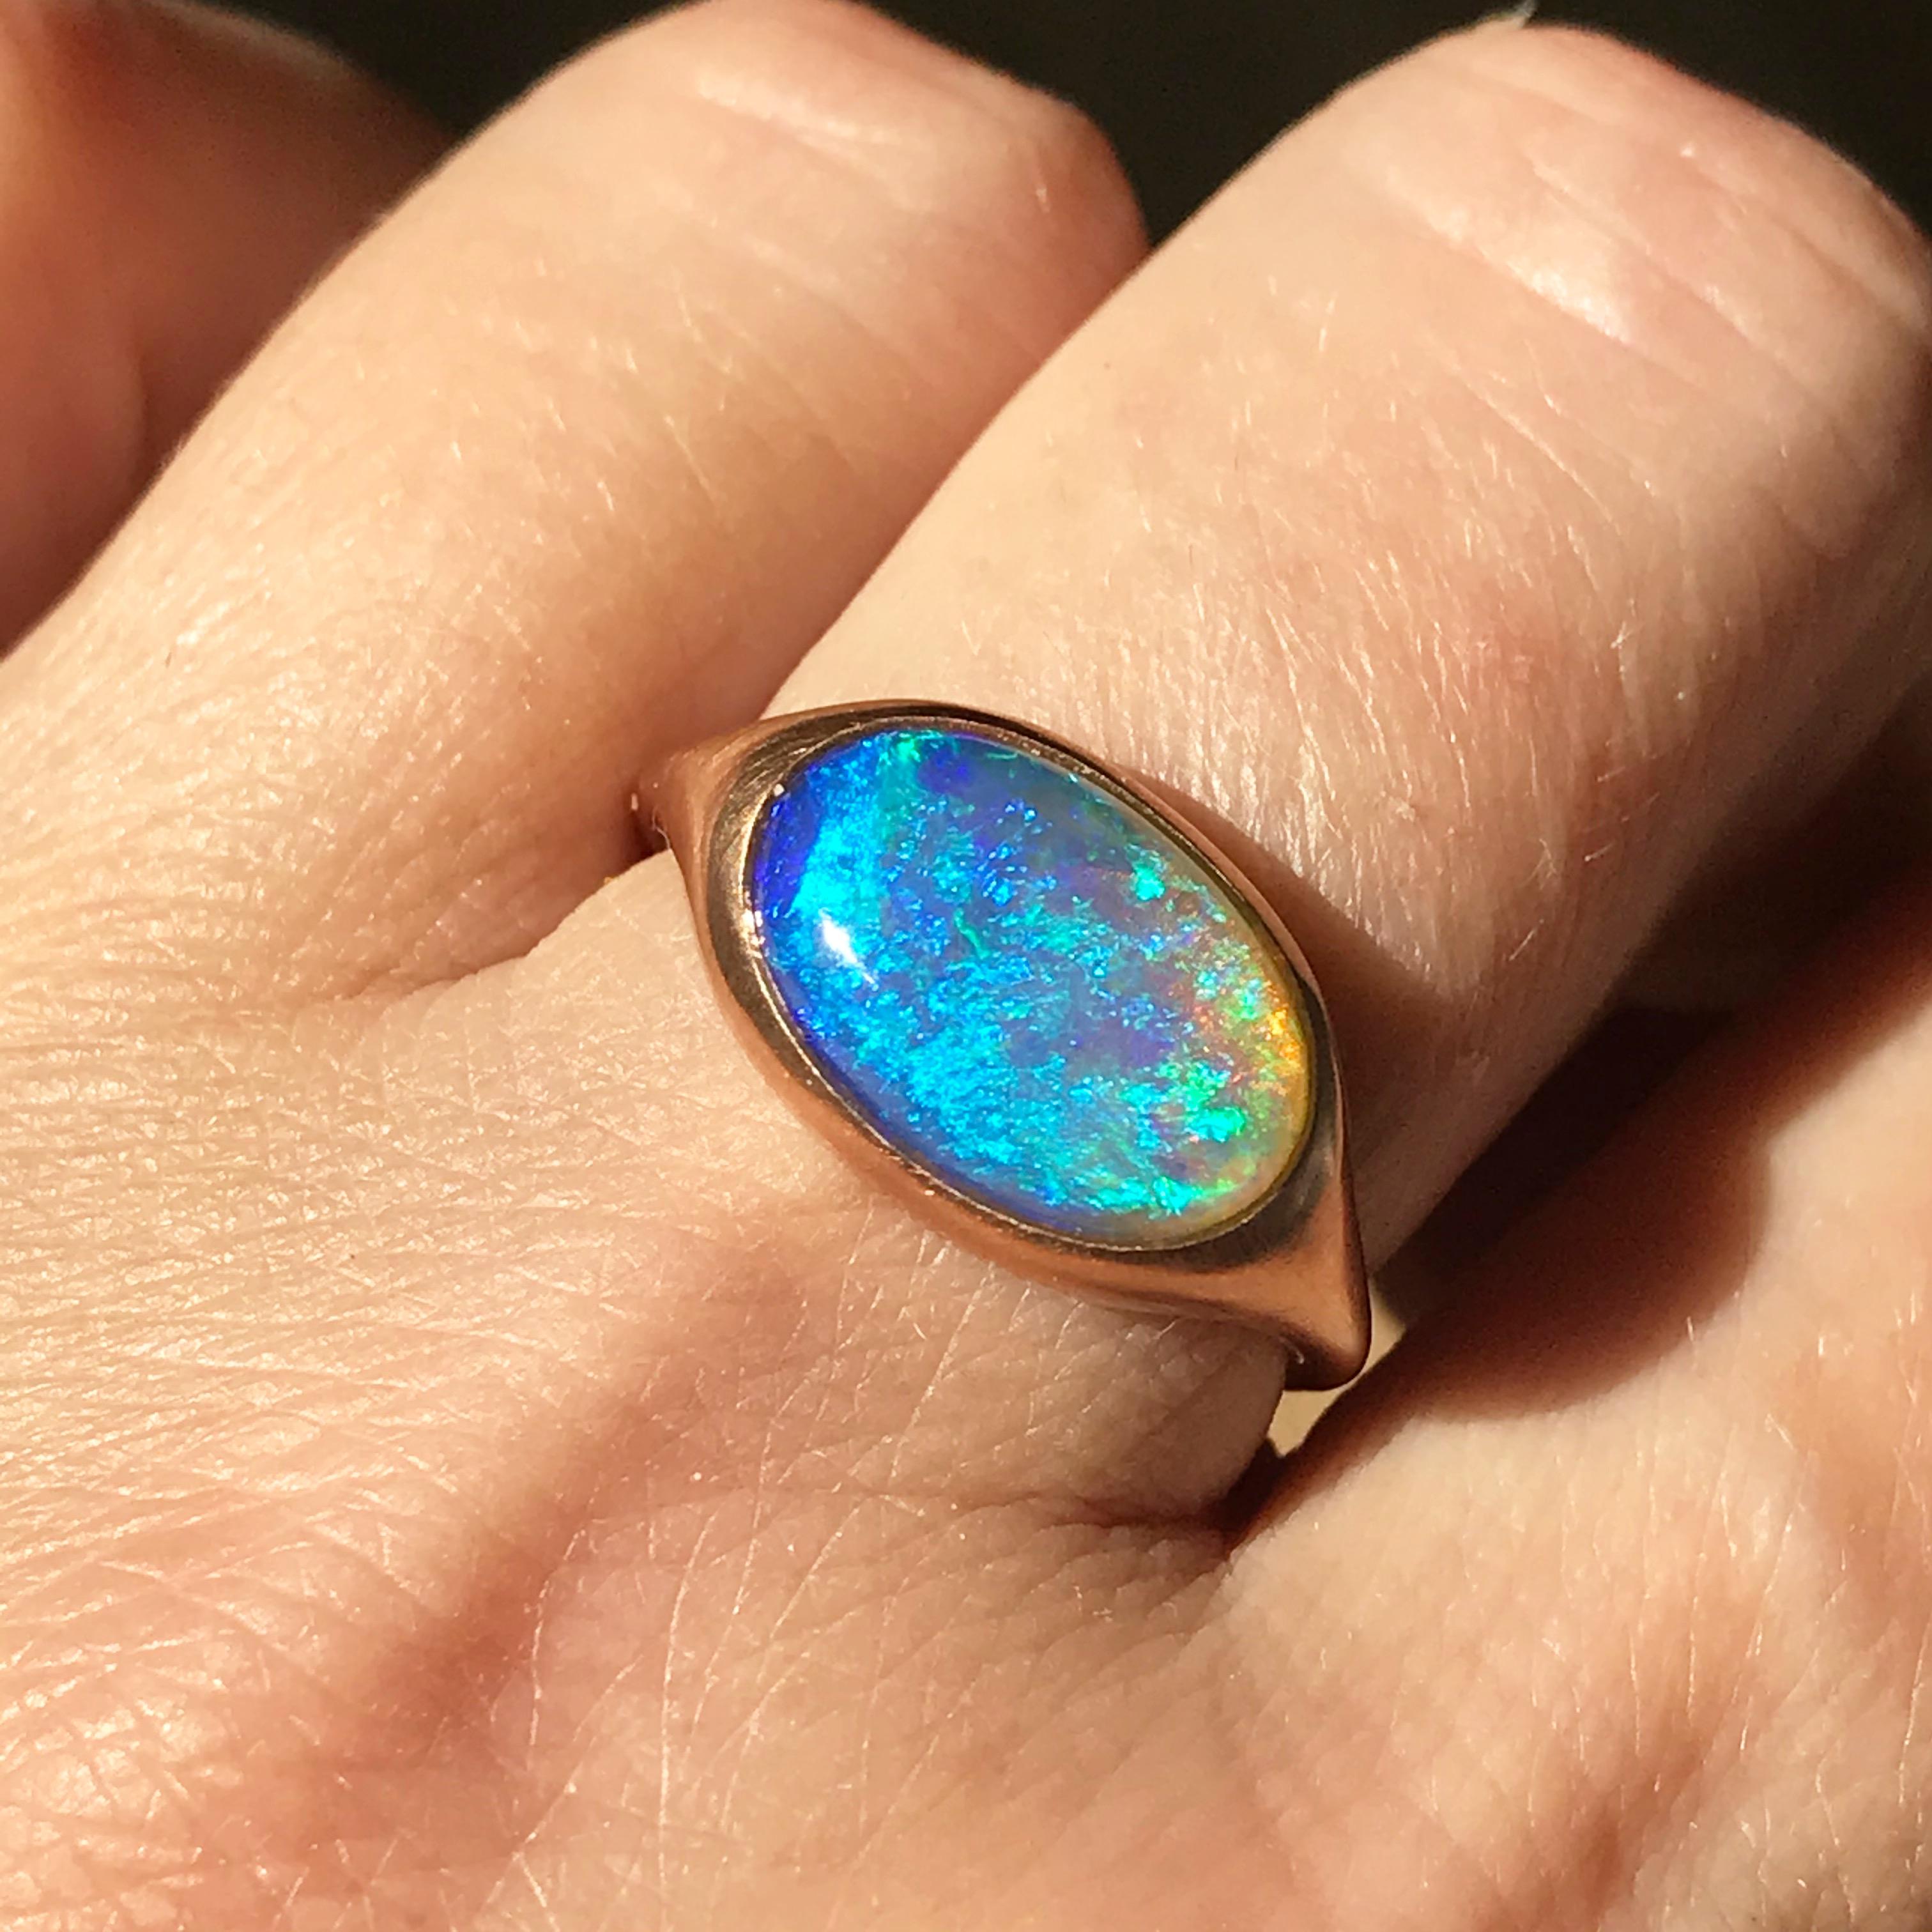 Dalben design One of a kind 18 kt rose gold matte finishing ring with a 3,31 carat bezel-set  oval deep blue lovely Lightning Ridge Australian Opal  .  
The stone has deep blue green spots .
Ring size 7 1/4 - EU 55 re-sizable to most finger sizes. 